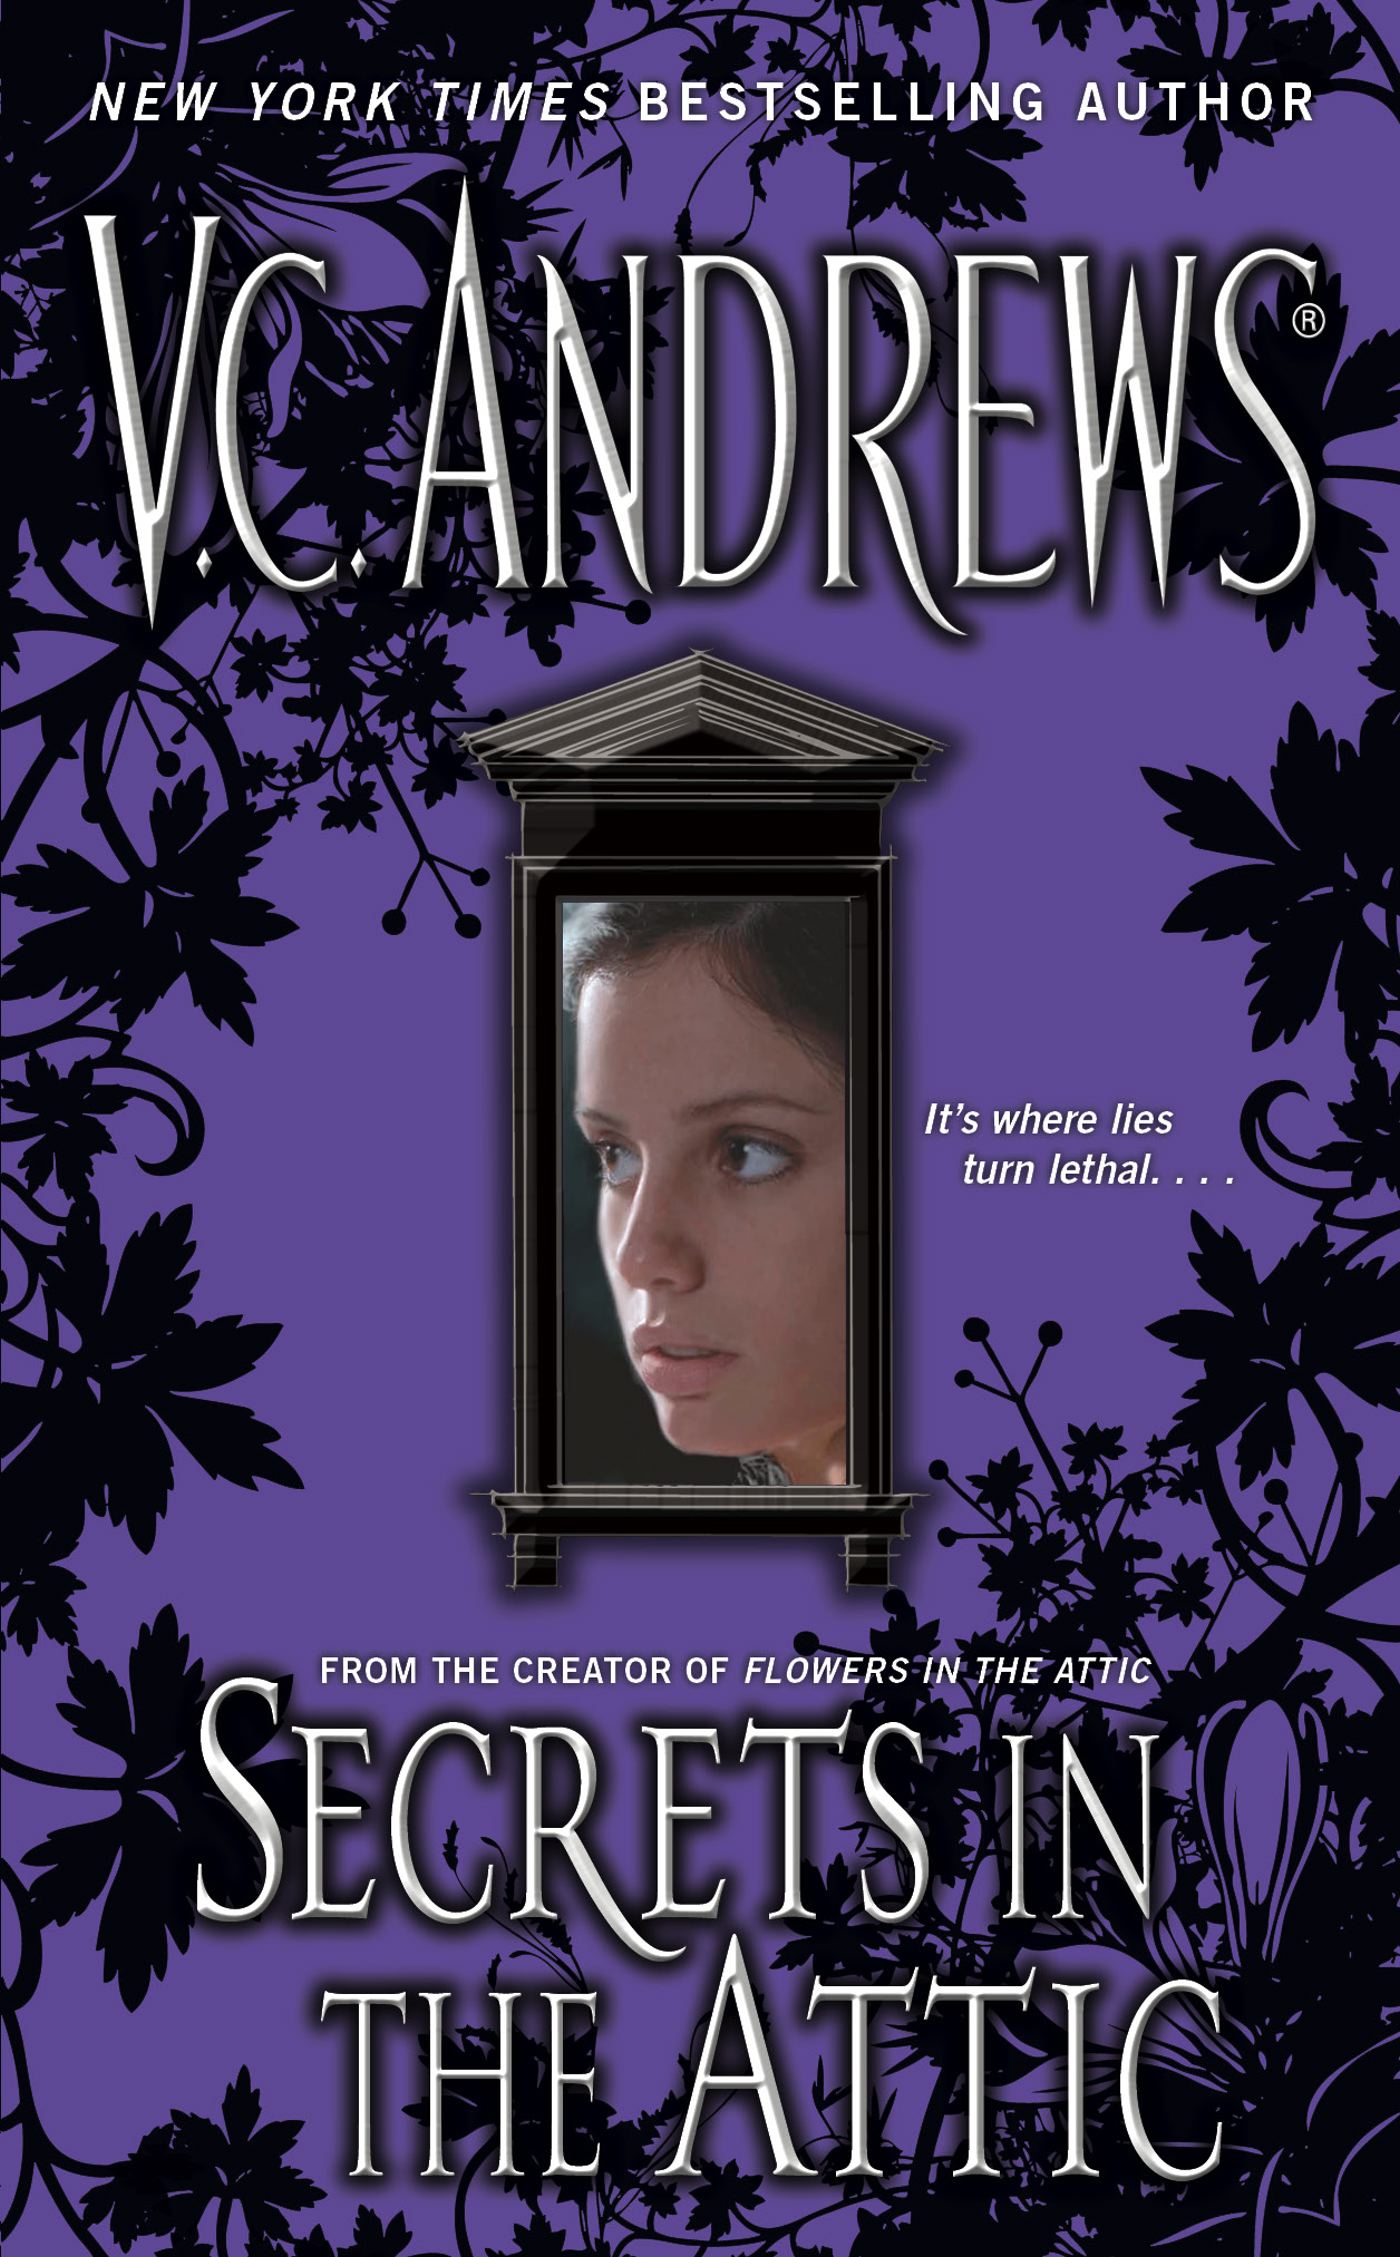 The Secrets Series: Secrets in the Attic (Paperback) - image 1 of 1